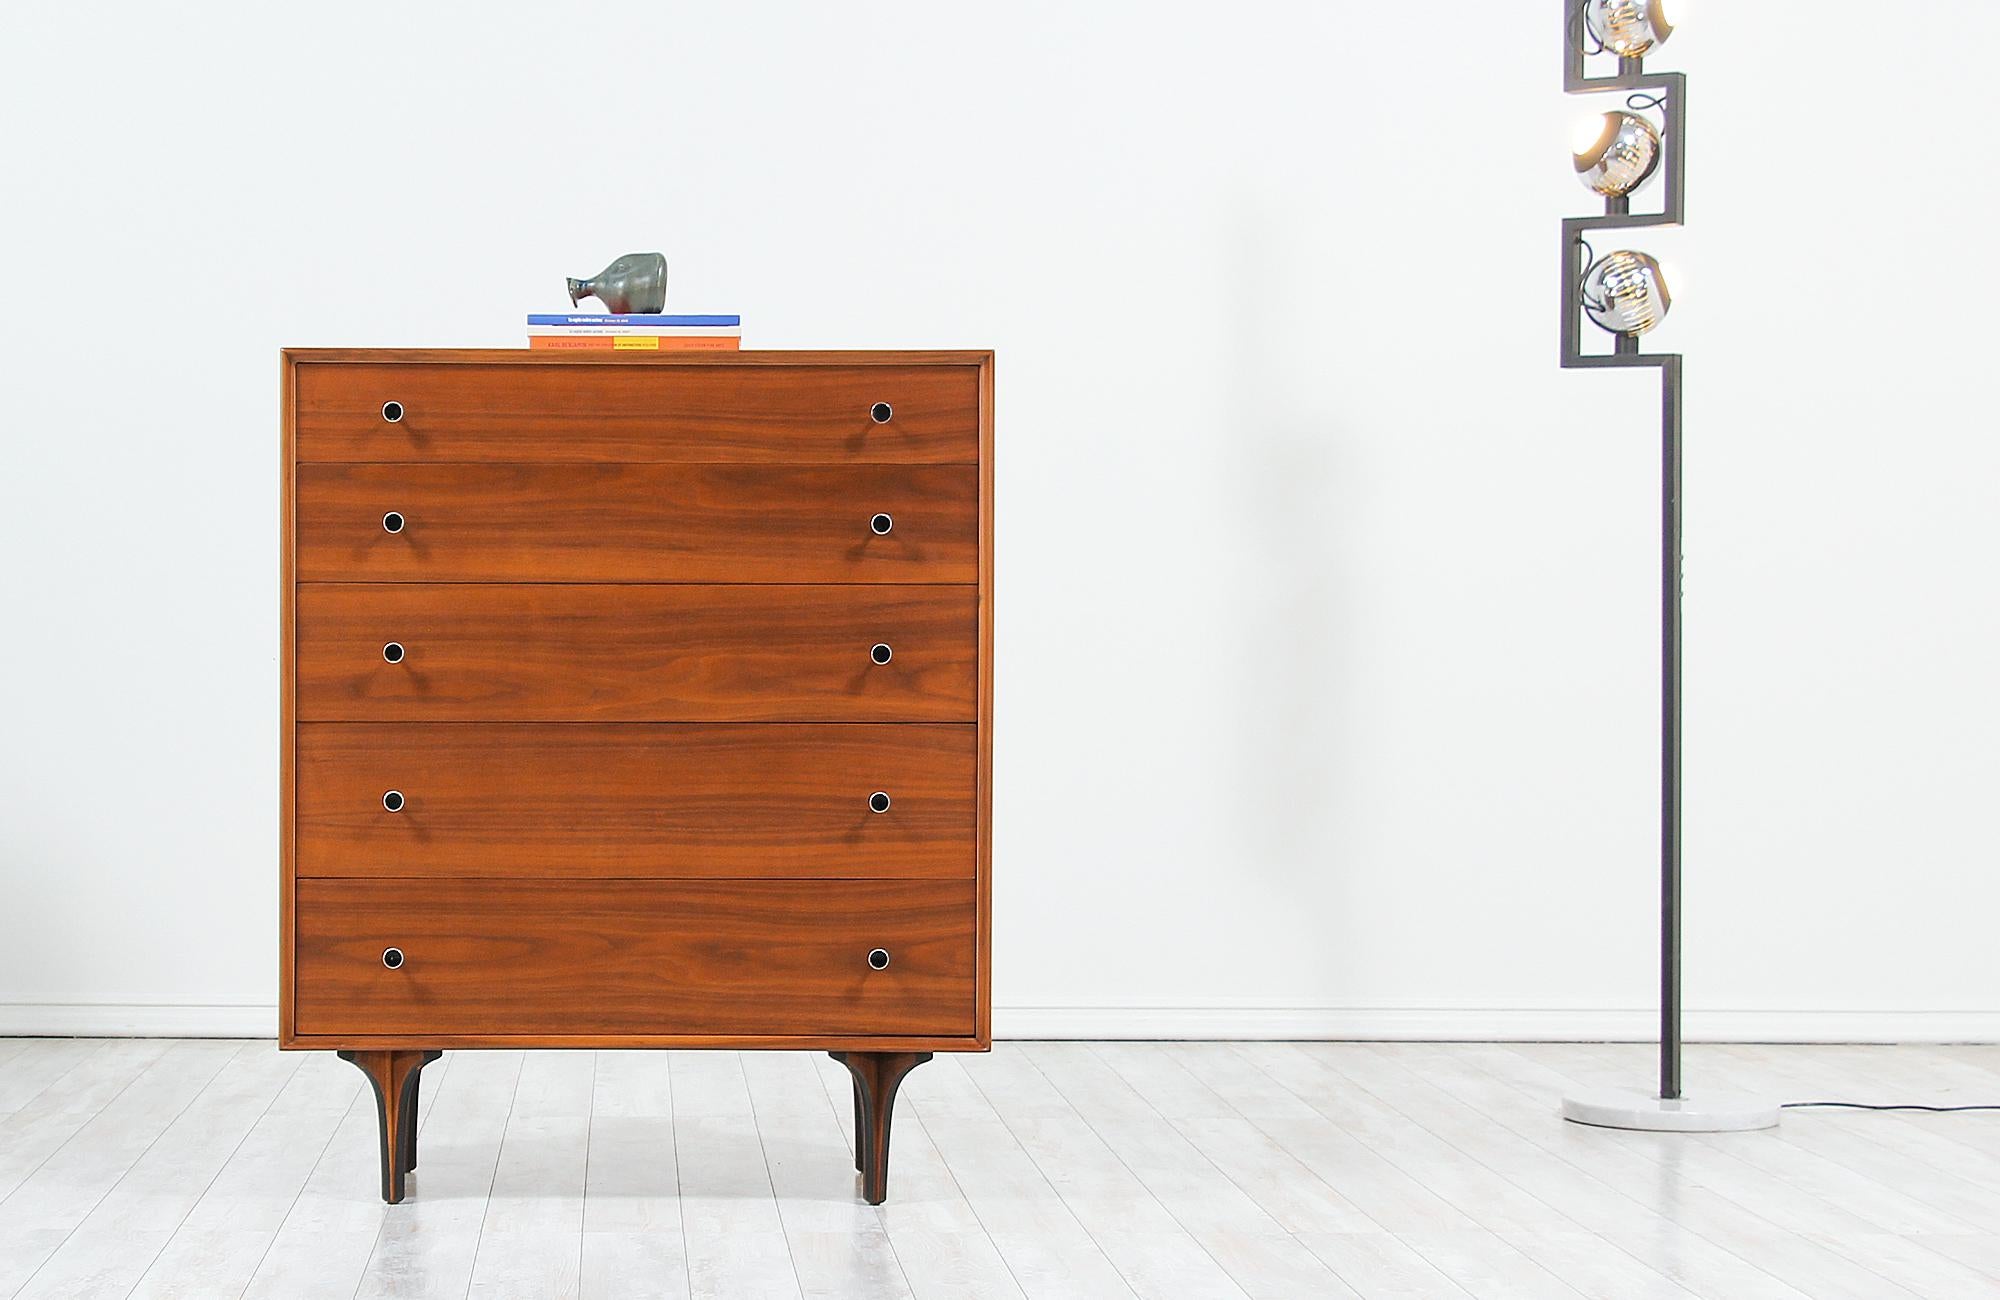 Beautiful vintage chest of drawers designed by Robert Baron for Glenn of California in the United States circa 1950s. This handsome, tall chest design features five spacious drawers with metal hourglass pulls that create a simple modern aesthetic.